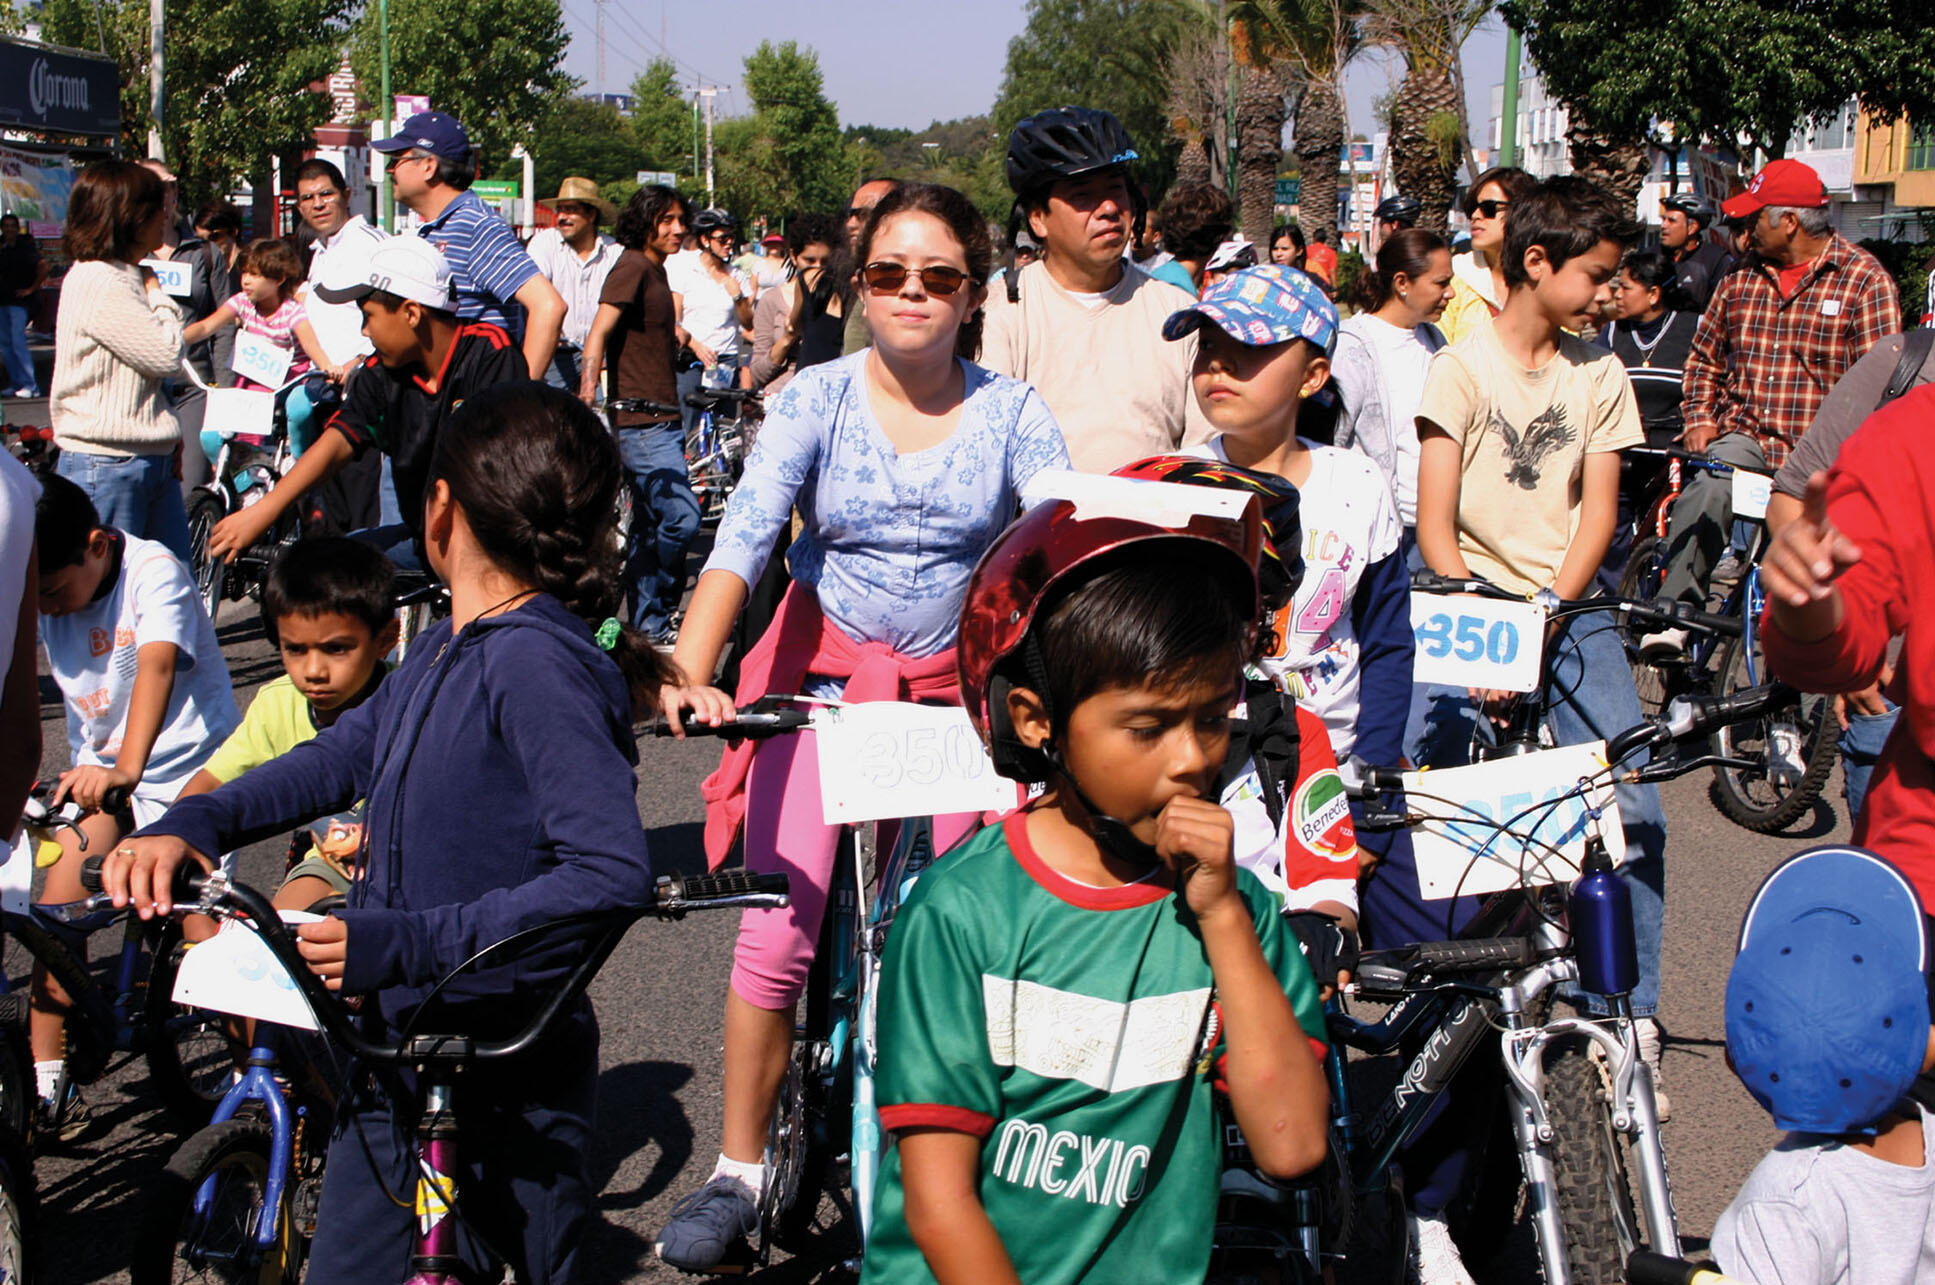 A crowd in the streets during "Saca la Bici” (Get Out Your Bike), a weekly bicycle ride program in Querétaro. (Photo courtesy of 350.org.)